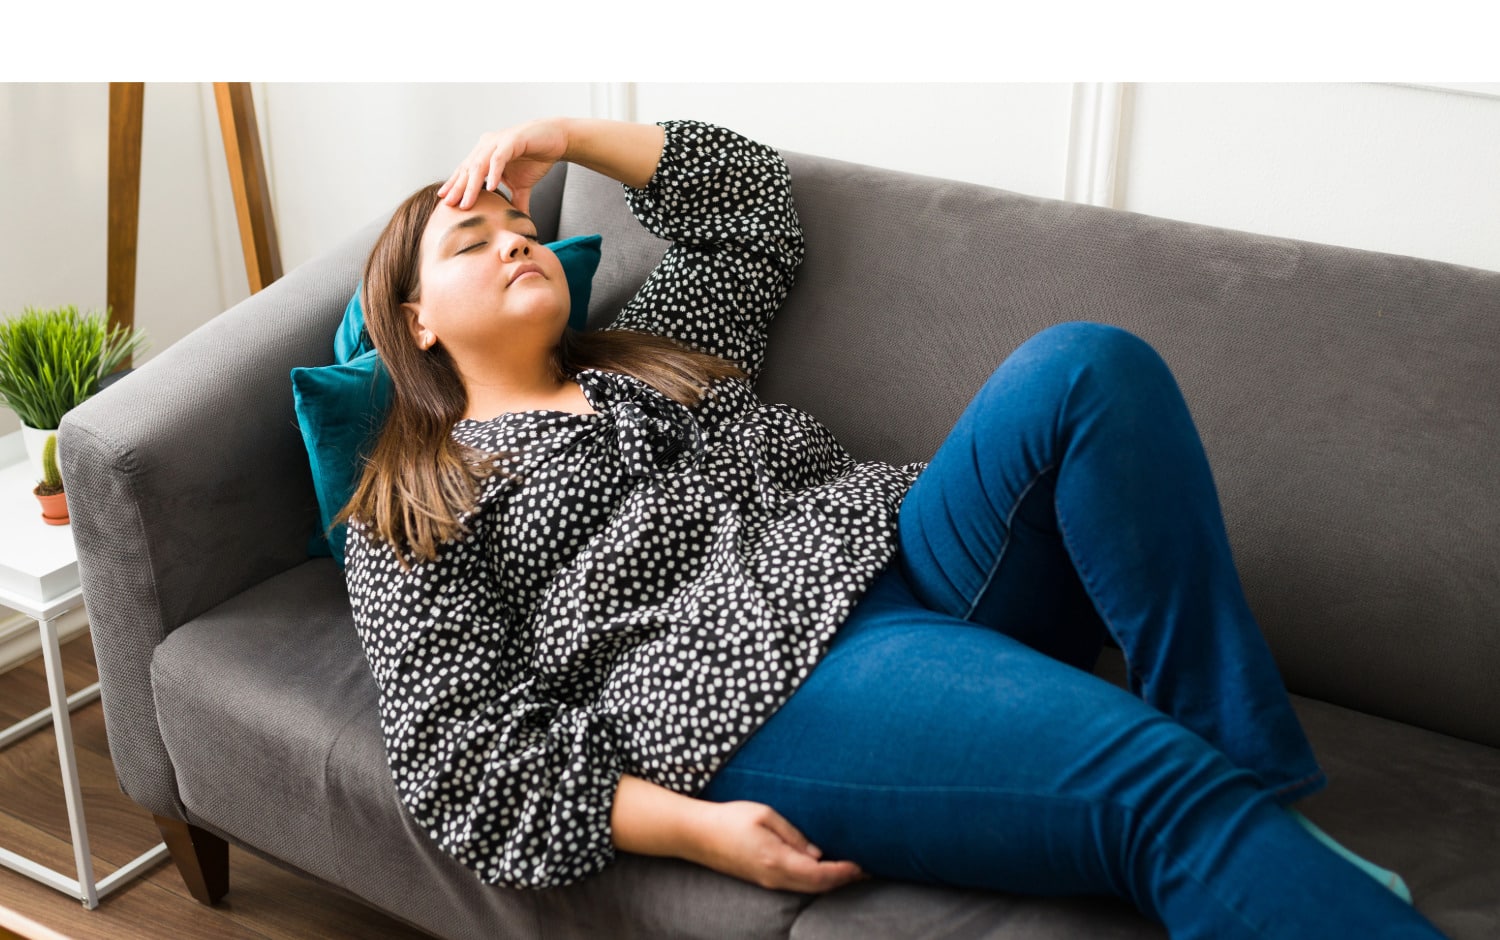 Woman with her hand on her forehead living  with hypermobility spectrum disorder taking time out to rest on the couch to preserve energy.